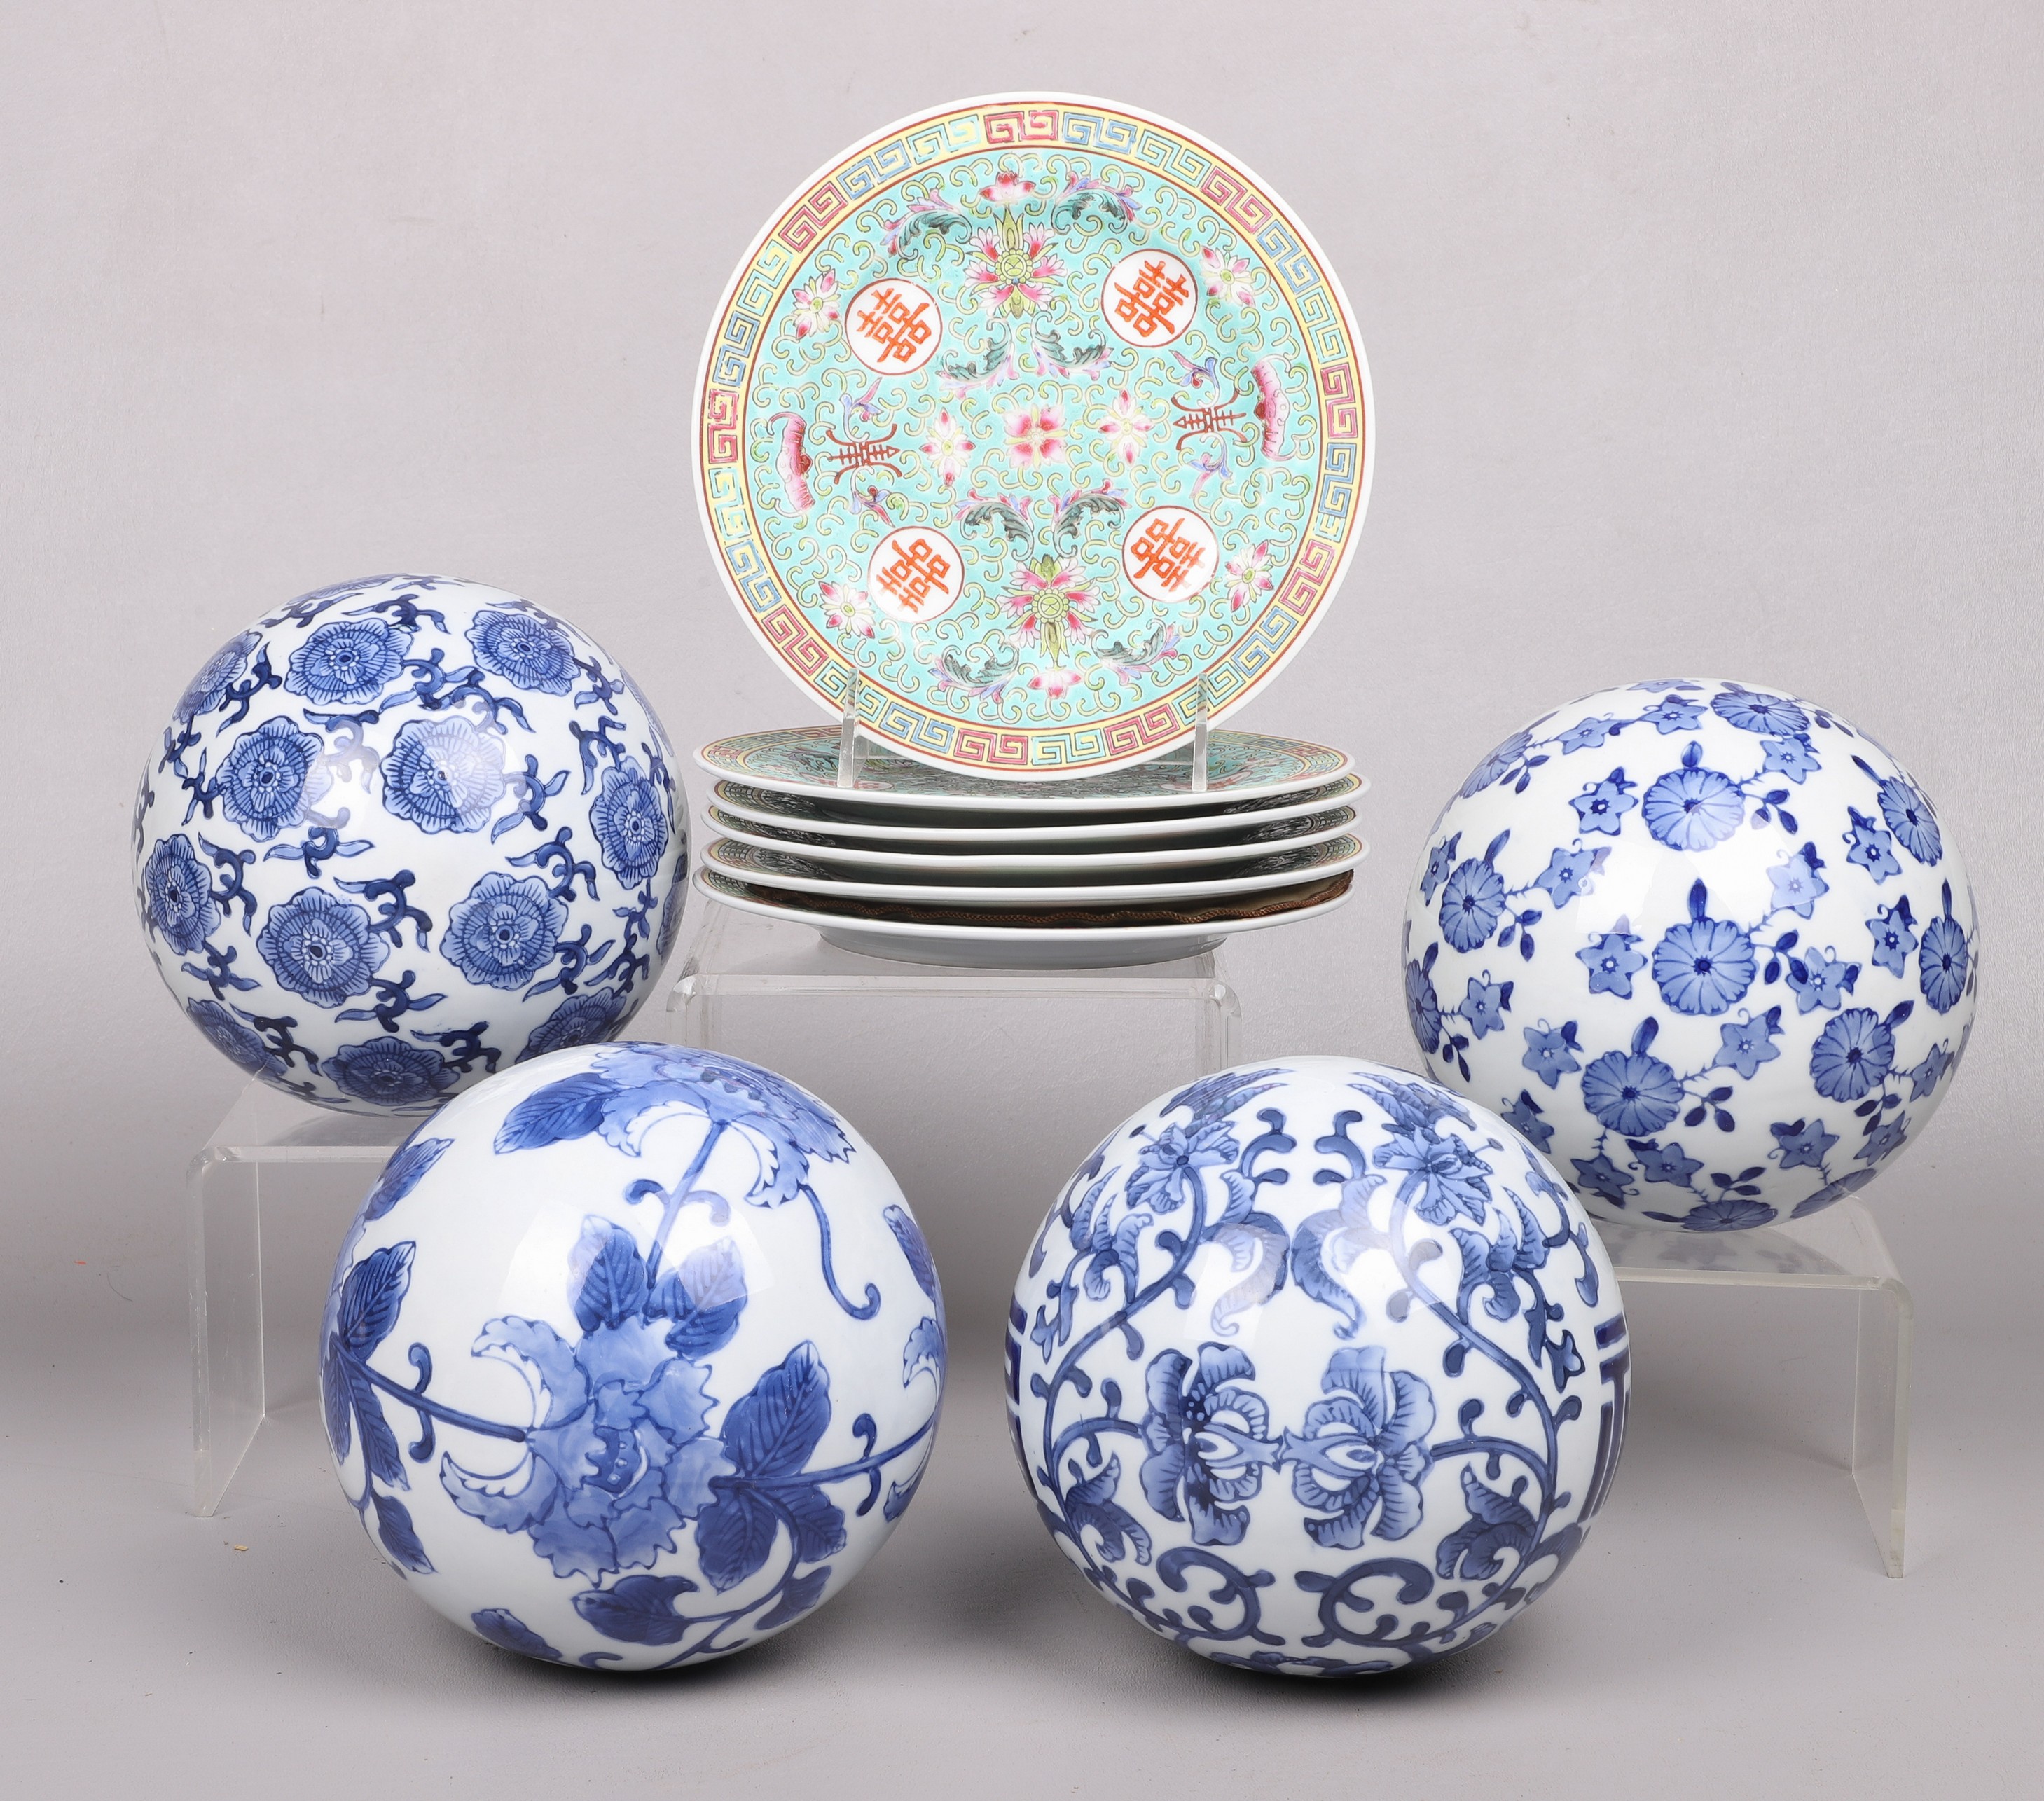 Pottery carpet balls and plates 310052